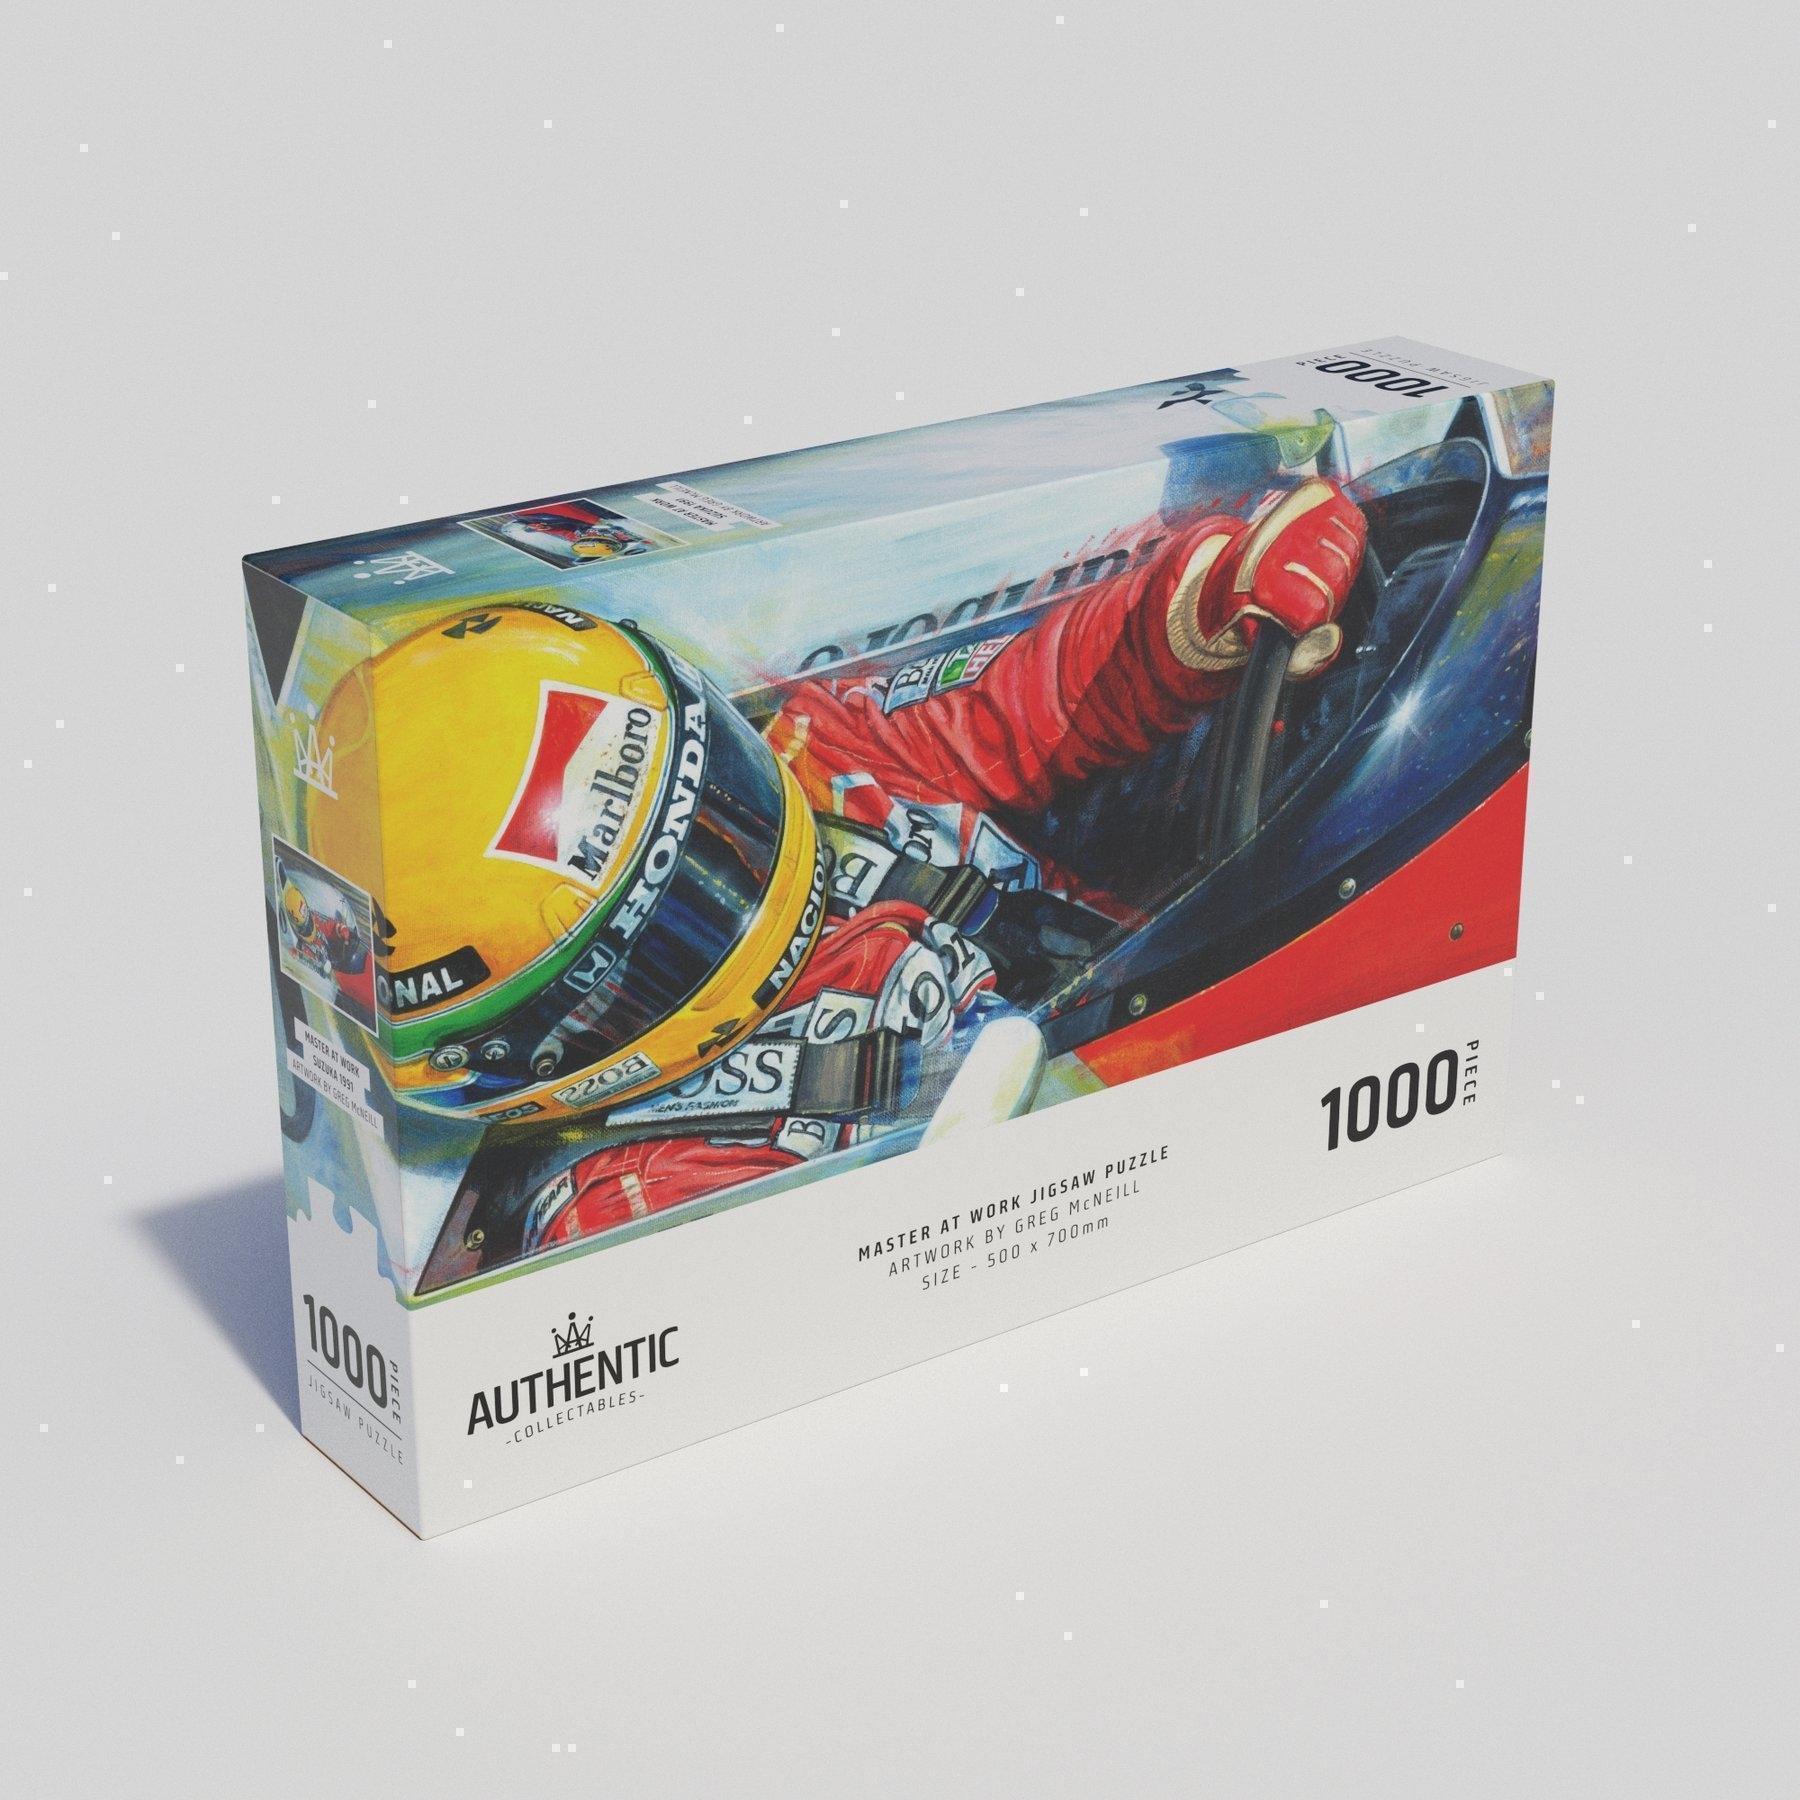 Master At Work 1000 Piece Jigsaw Puzzle Motorsport Theme By Greg McNeill